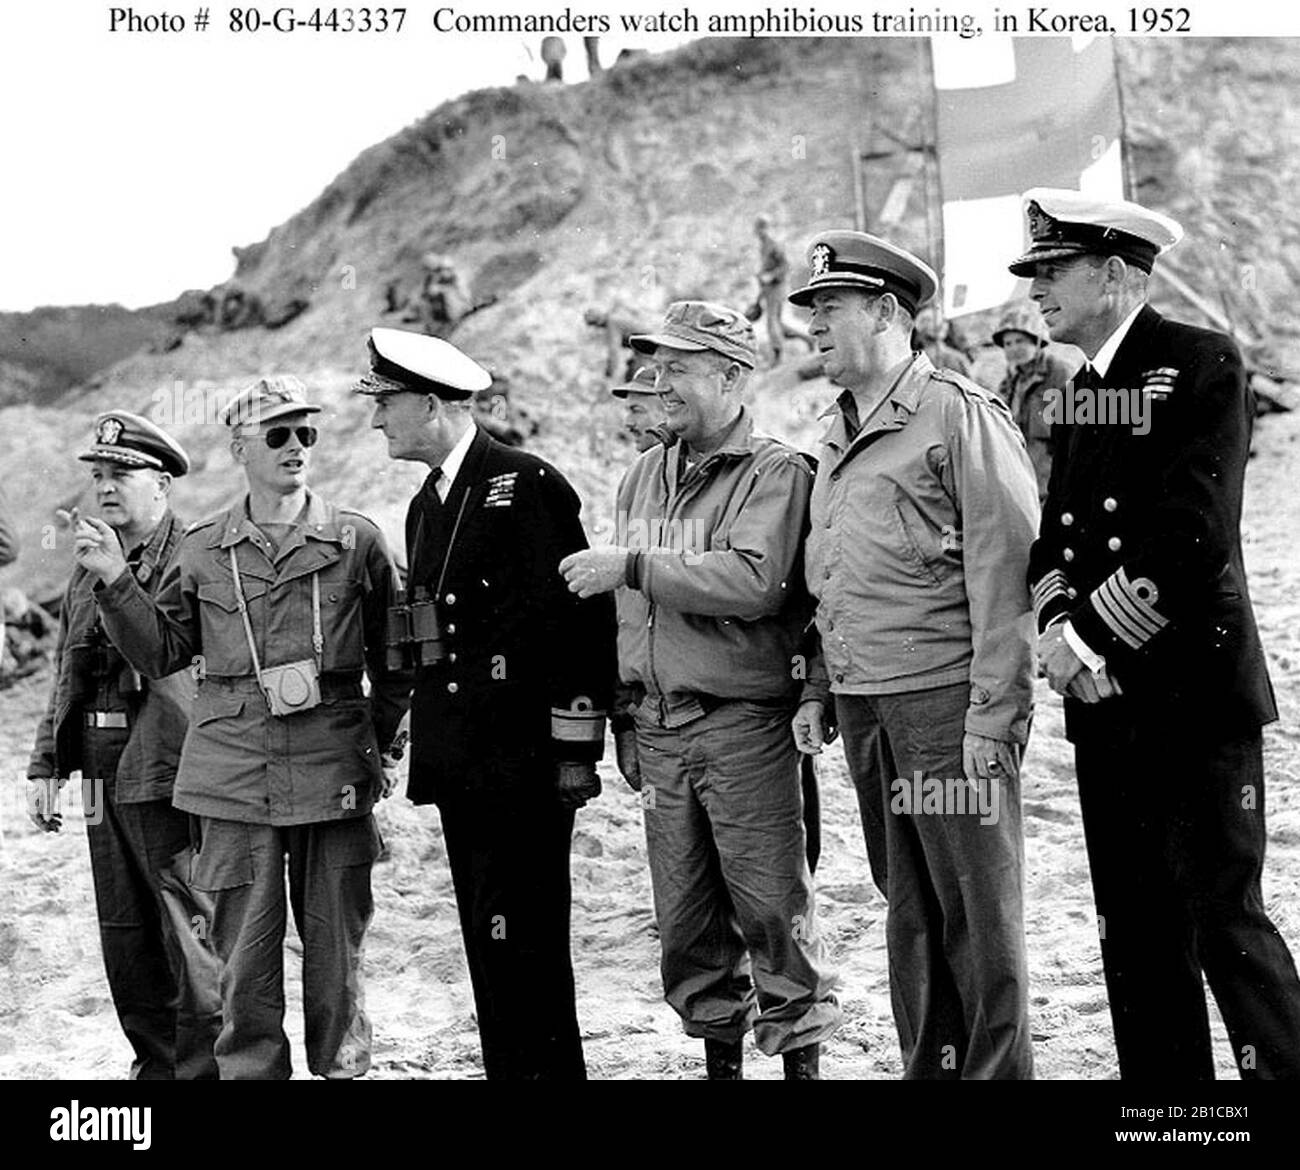 G443337 US and British Officers view training ops near Inchon. Stock Photo